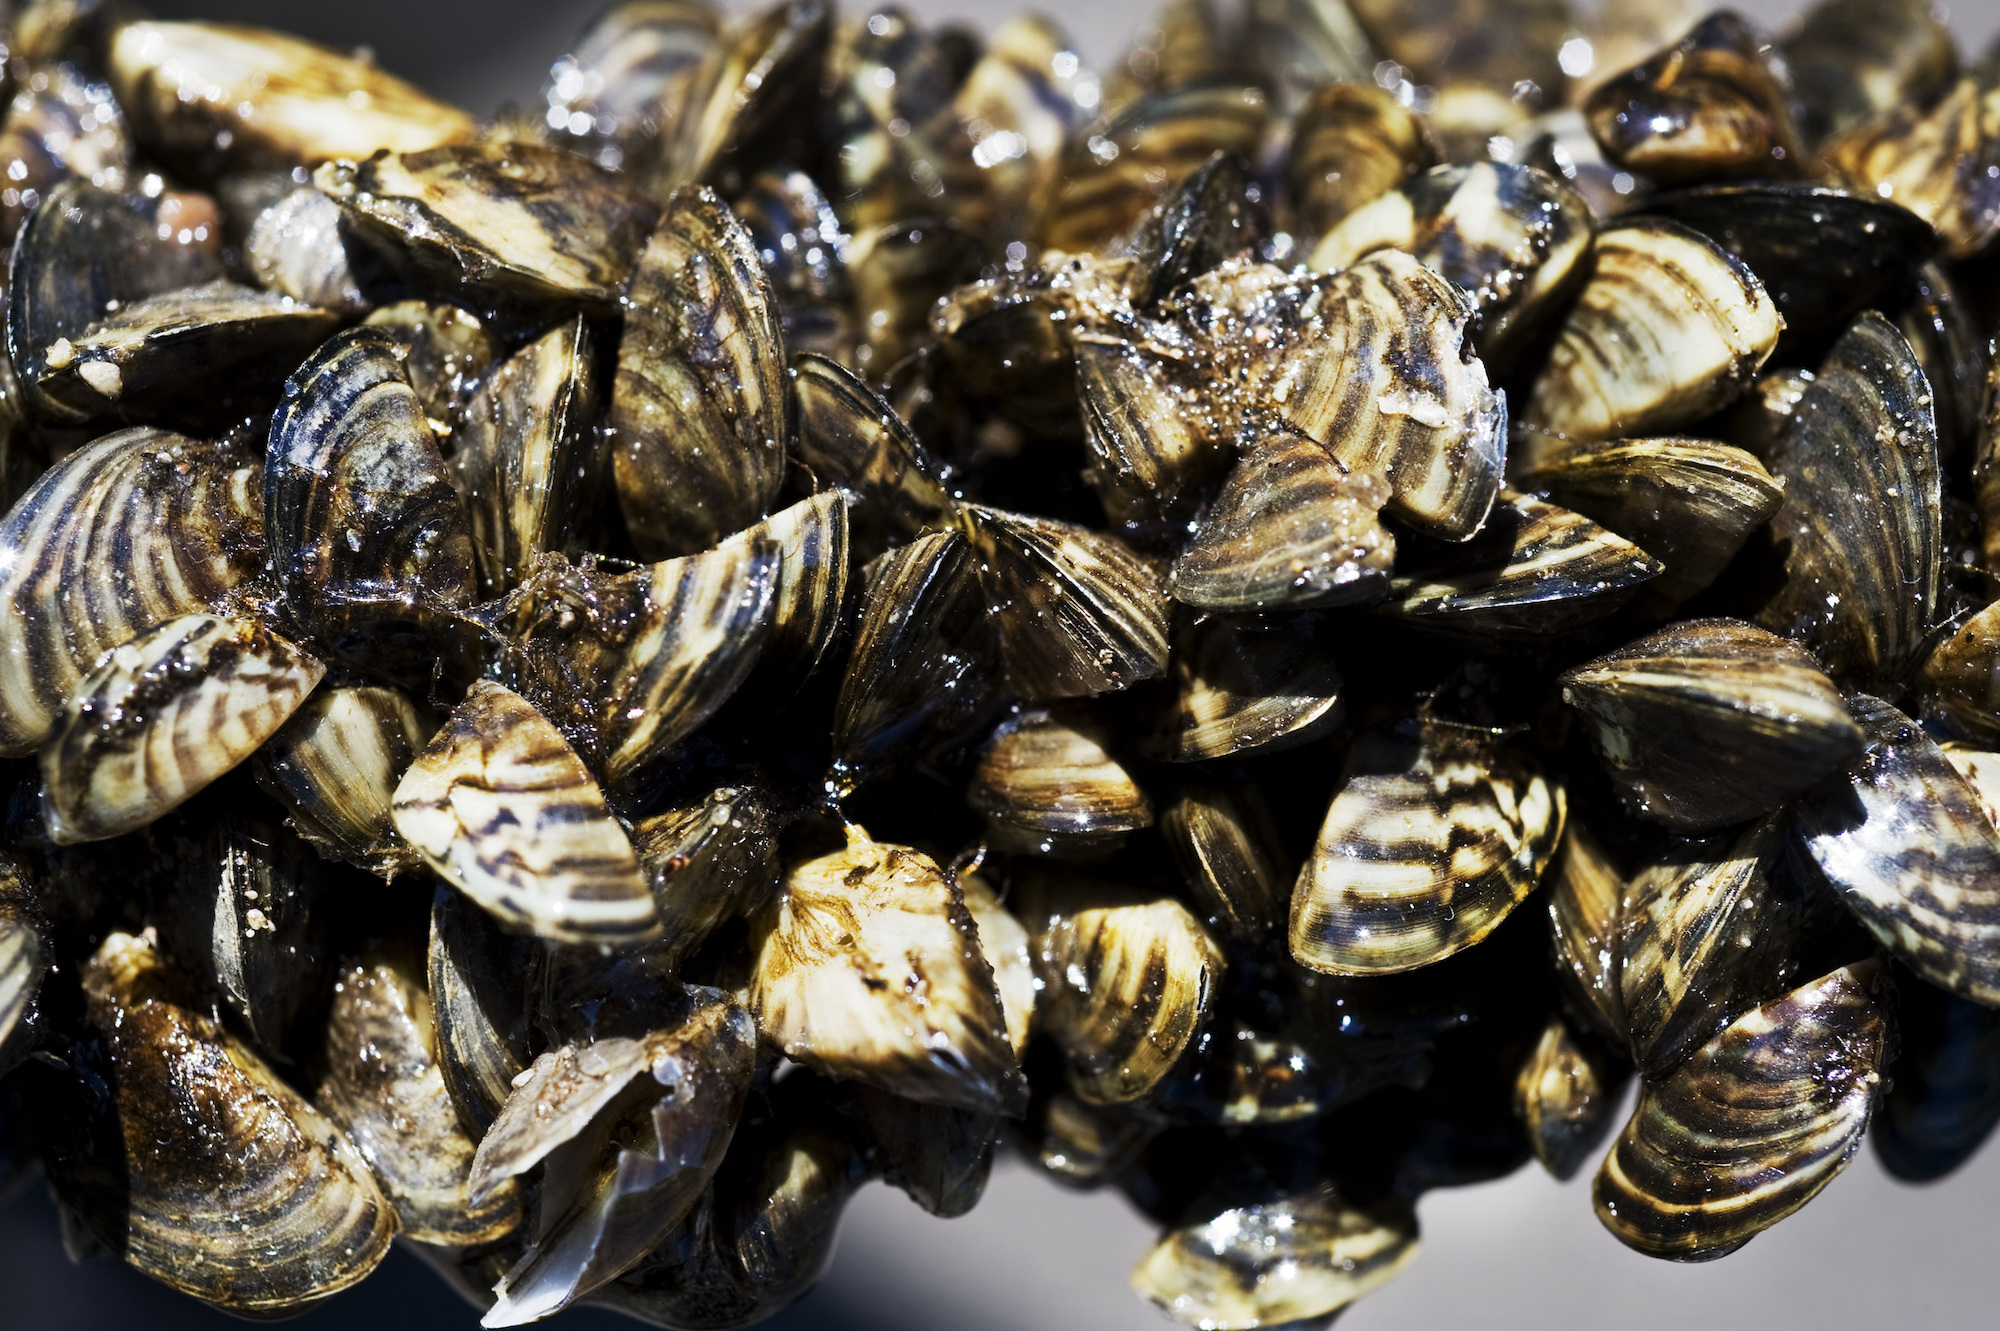 Zebra mussels, shown here clustered on a small tree branch, can destroy boat engines